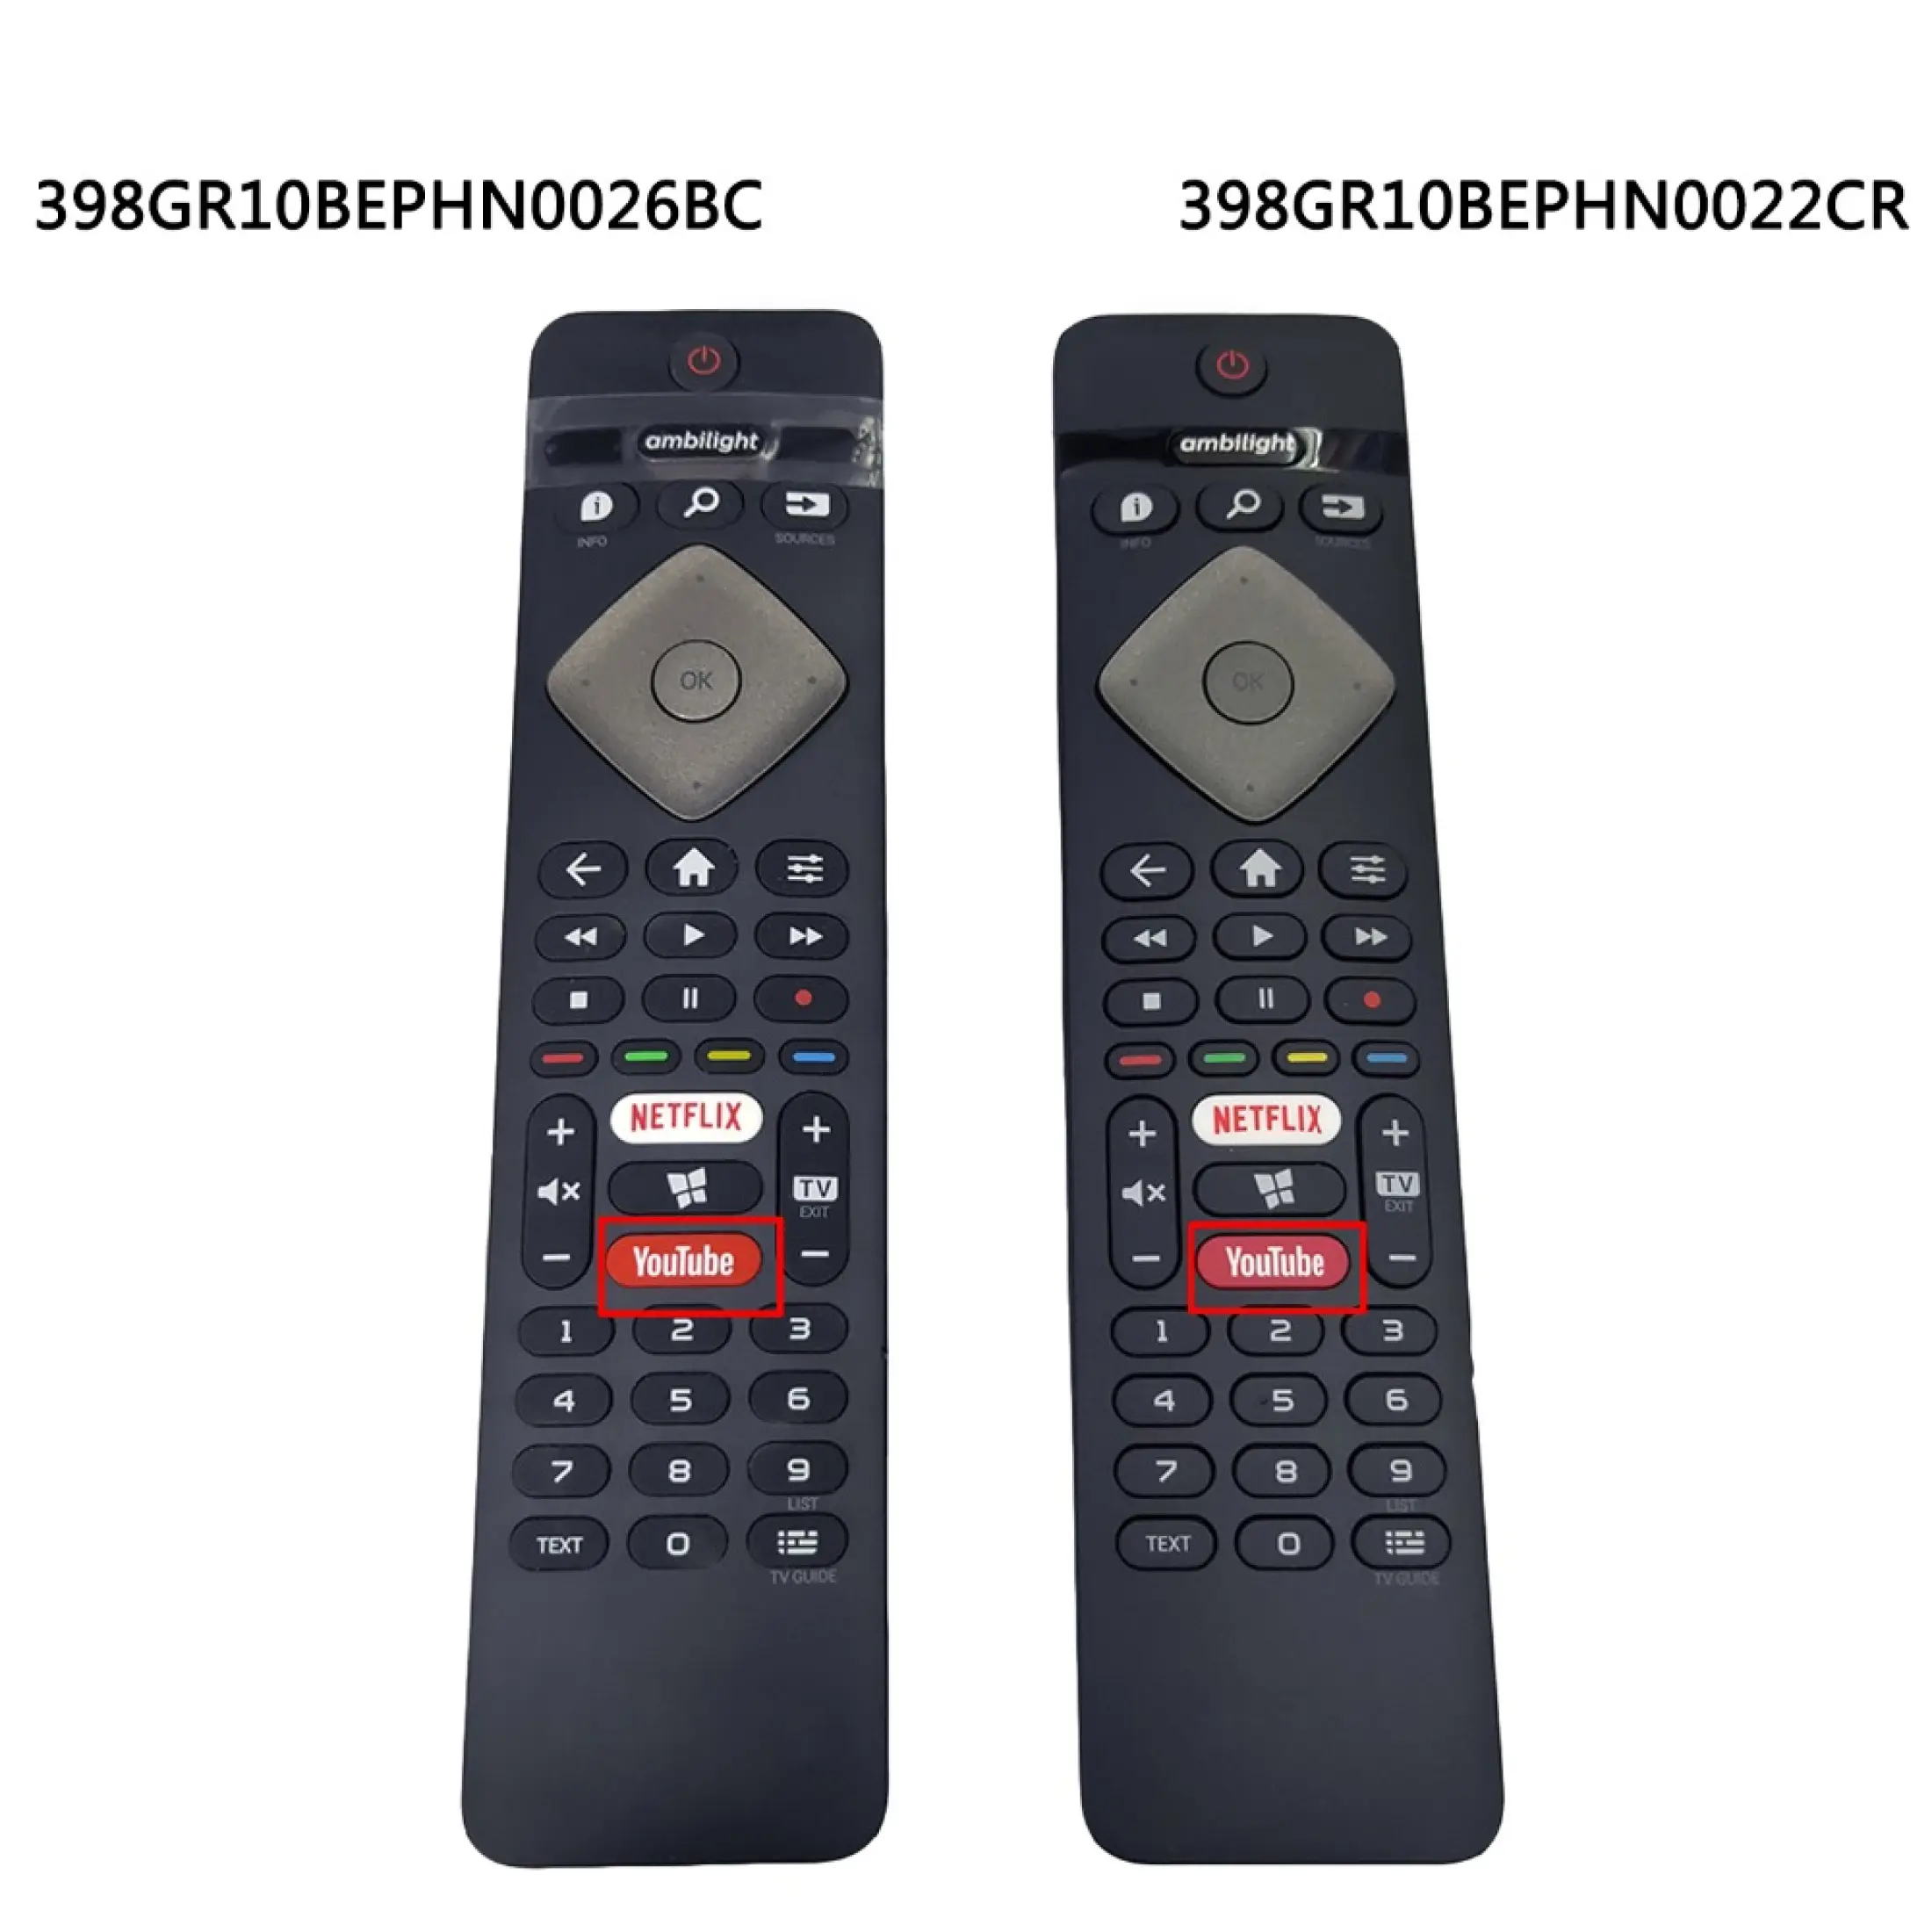 New Original Brc0884405 01 For Philips Smart Tv Remote Control 398gr10bephn0026bc 398gr10bephn0022cr With Netflix Youtube Lazada Indonesia